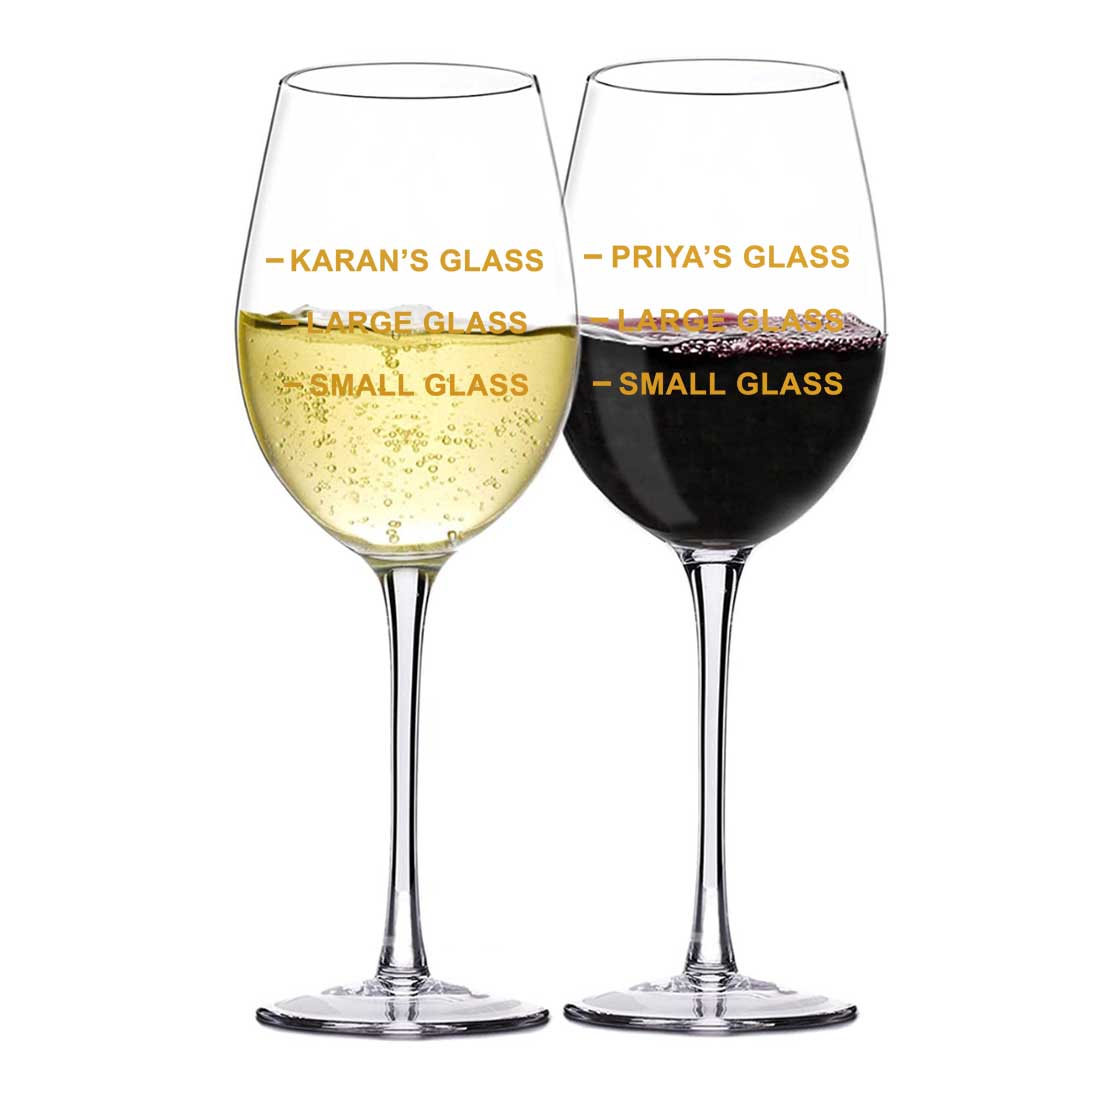 Custom Wine Glasses Gift Set Marriage Anniversary Gifts for Couple - Funny Measurement